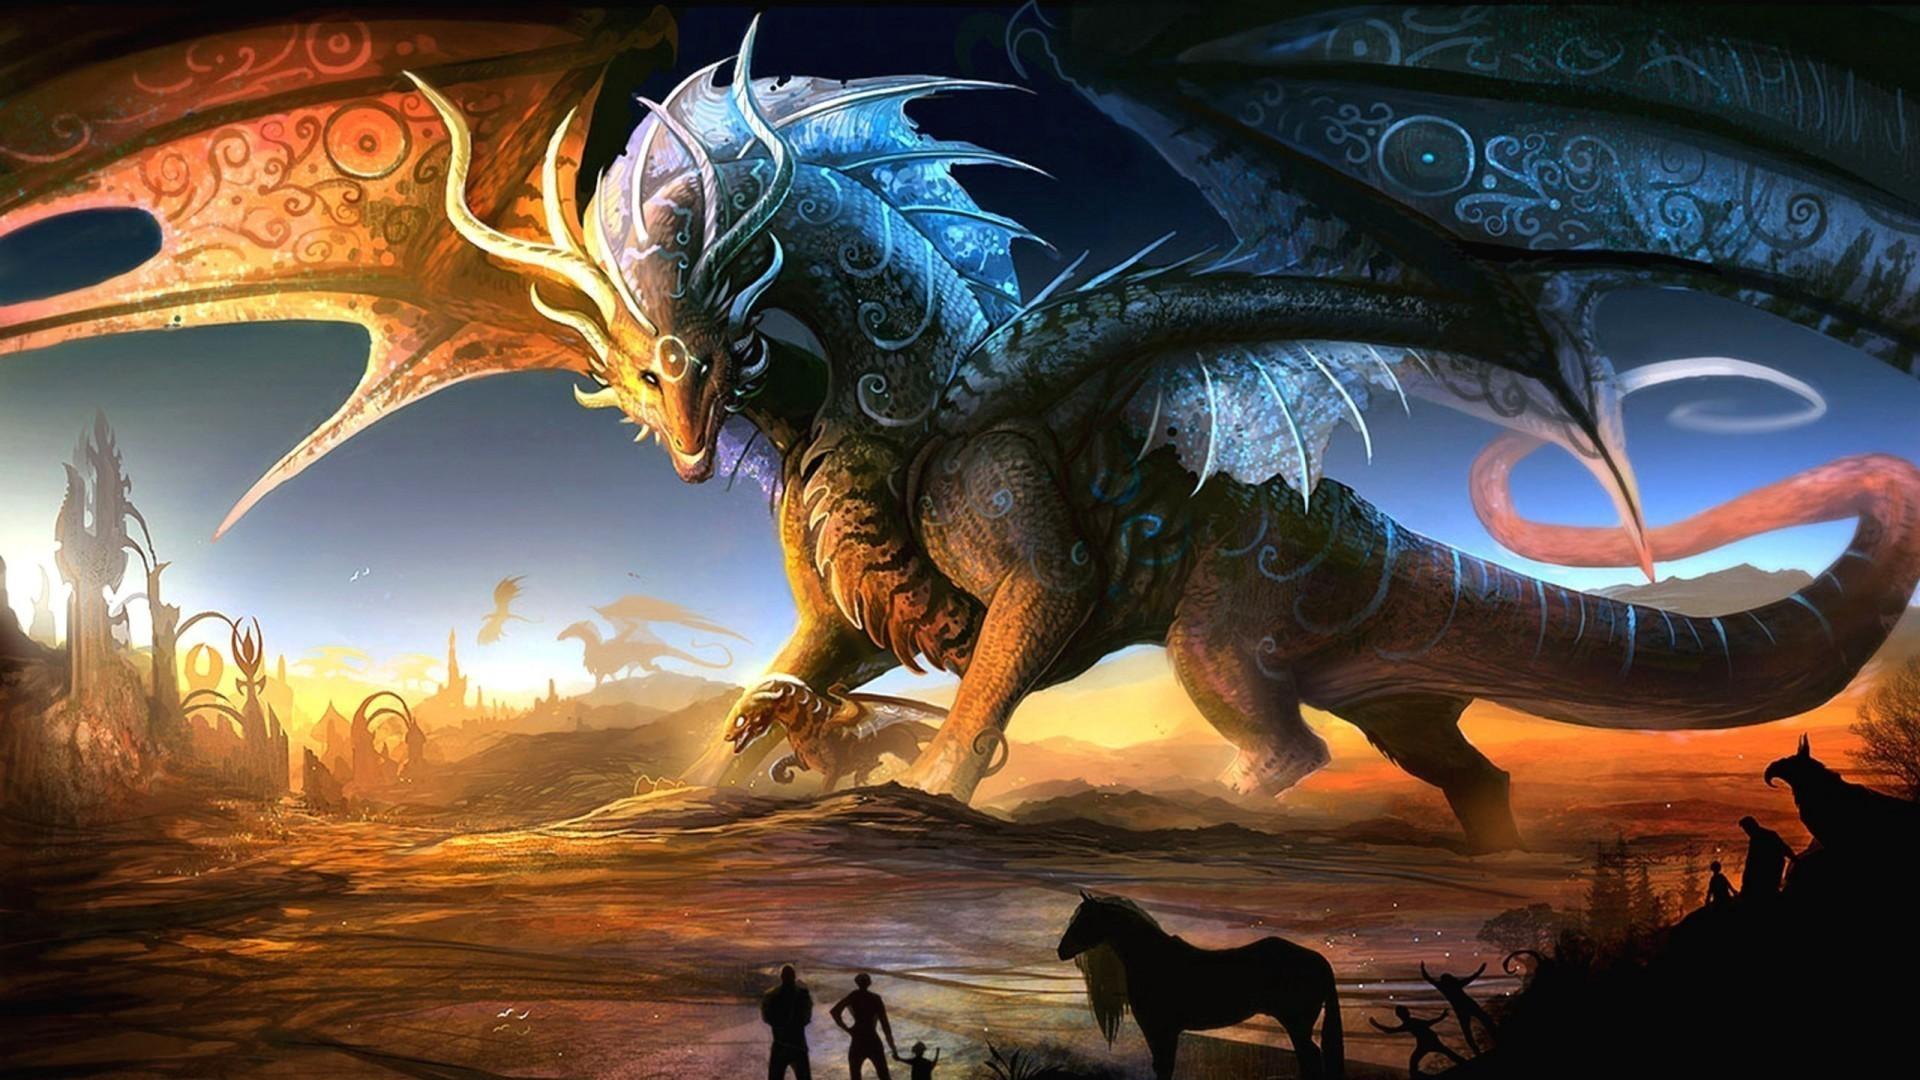 Download wallpaper 1920x1080 dragons, mother, cub, people, animals